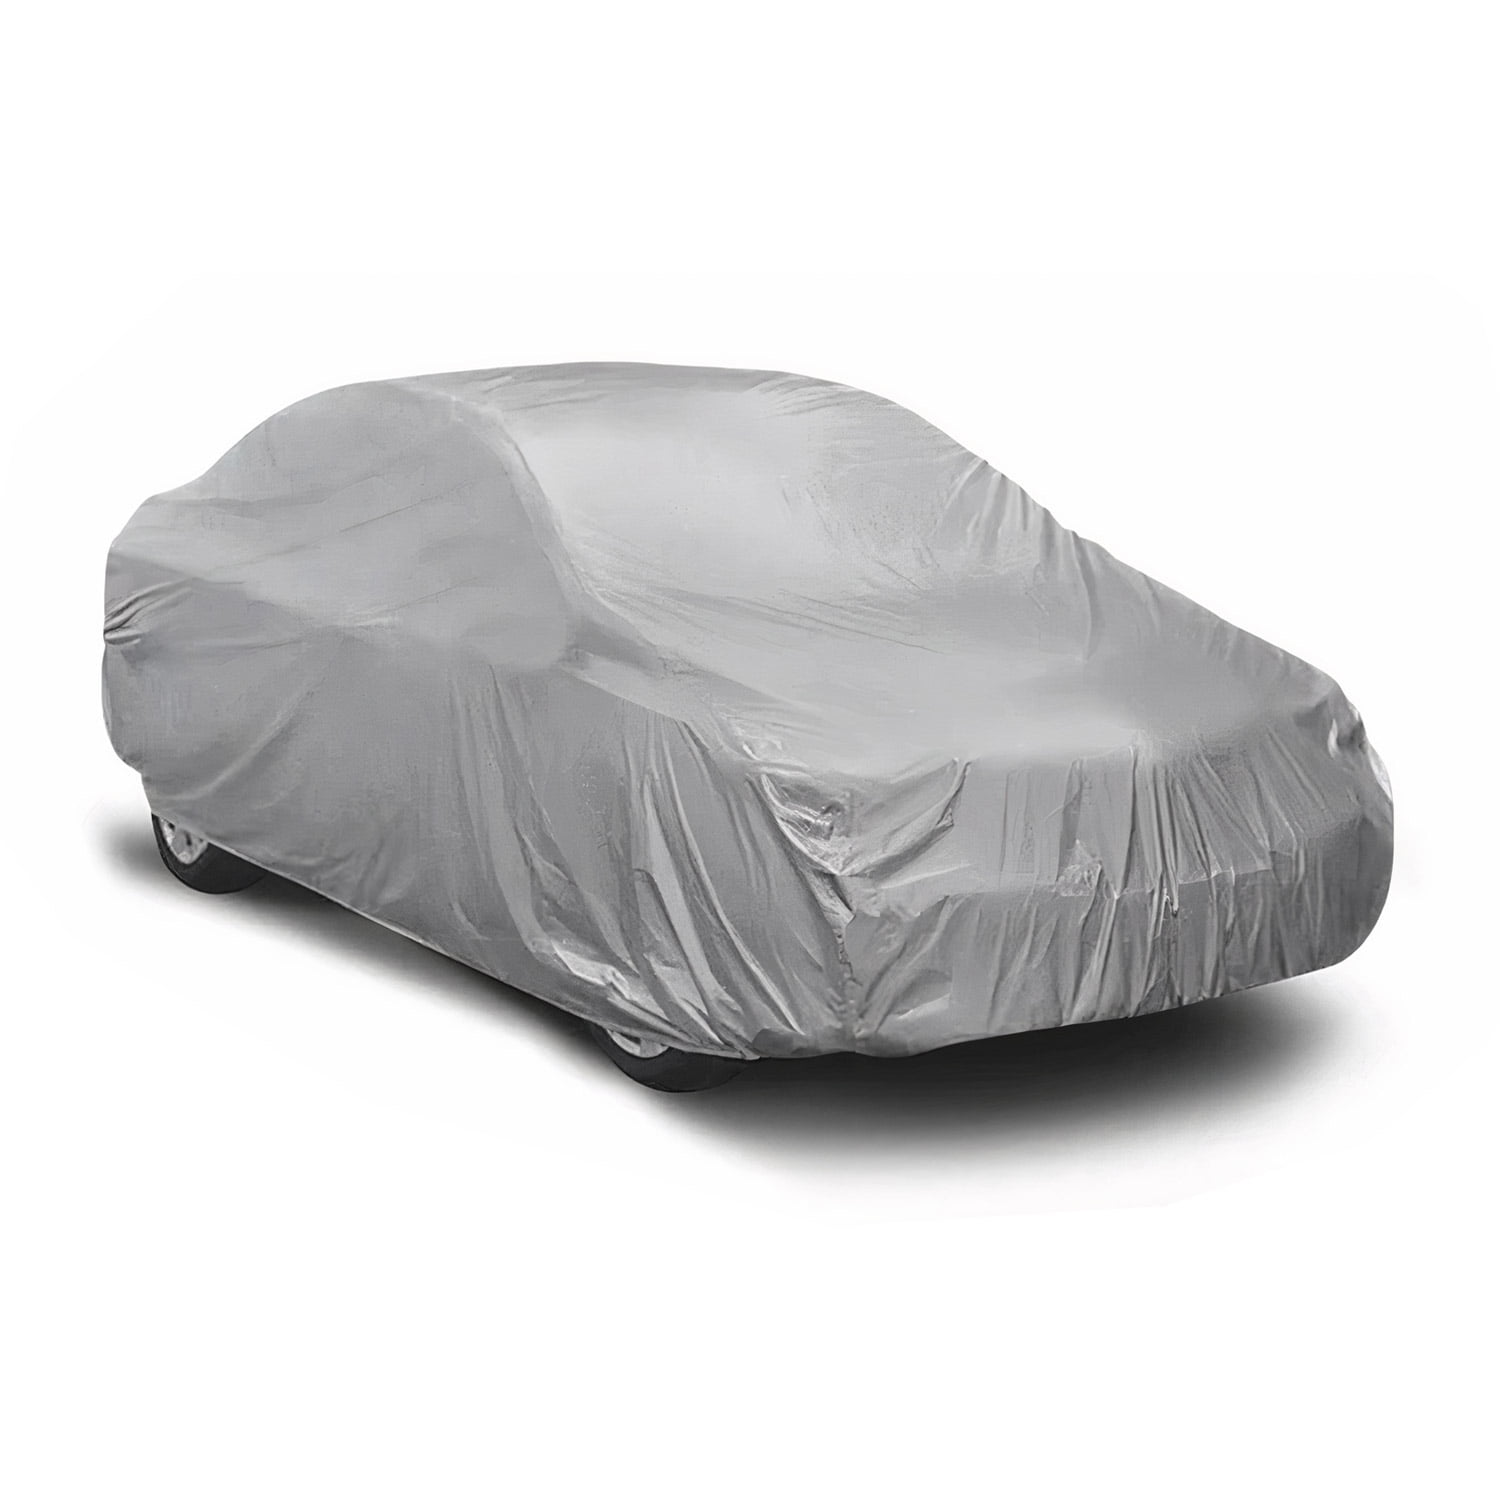 Black Breathable Fabric Indoor & Garage Full Car Cover for BMW Z4  Coupe/Roadster